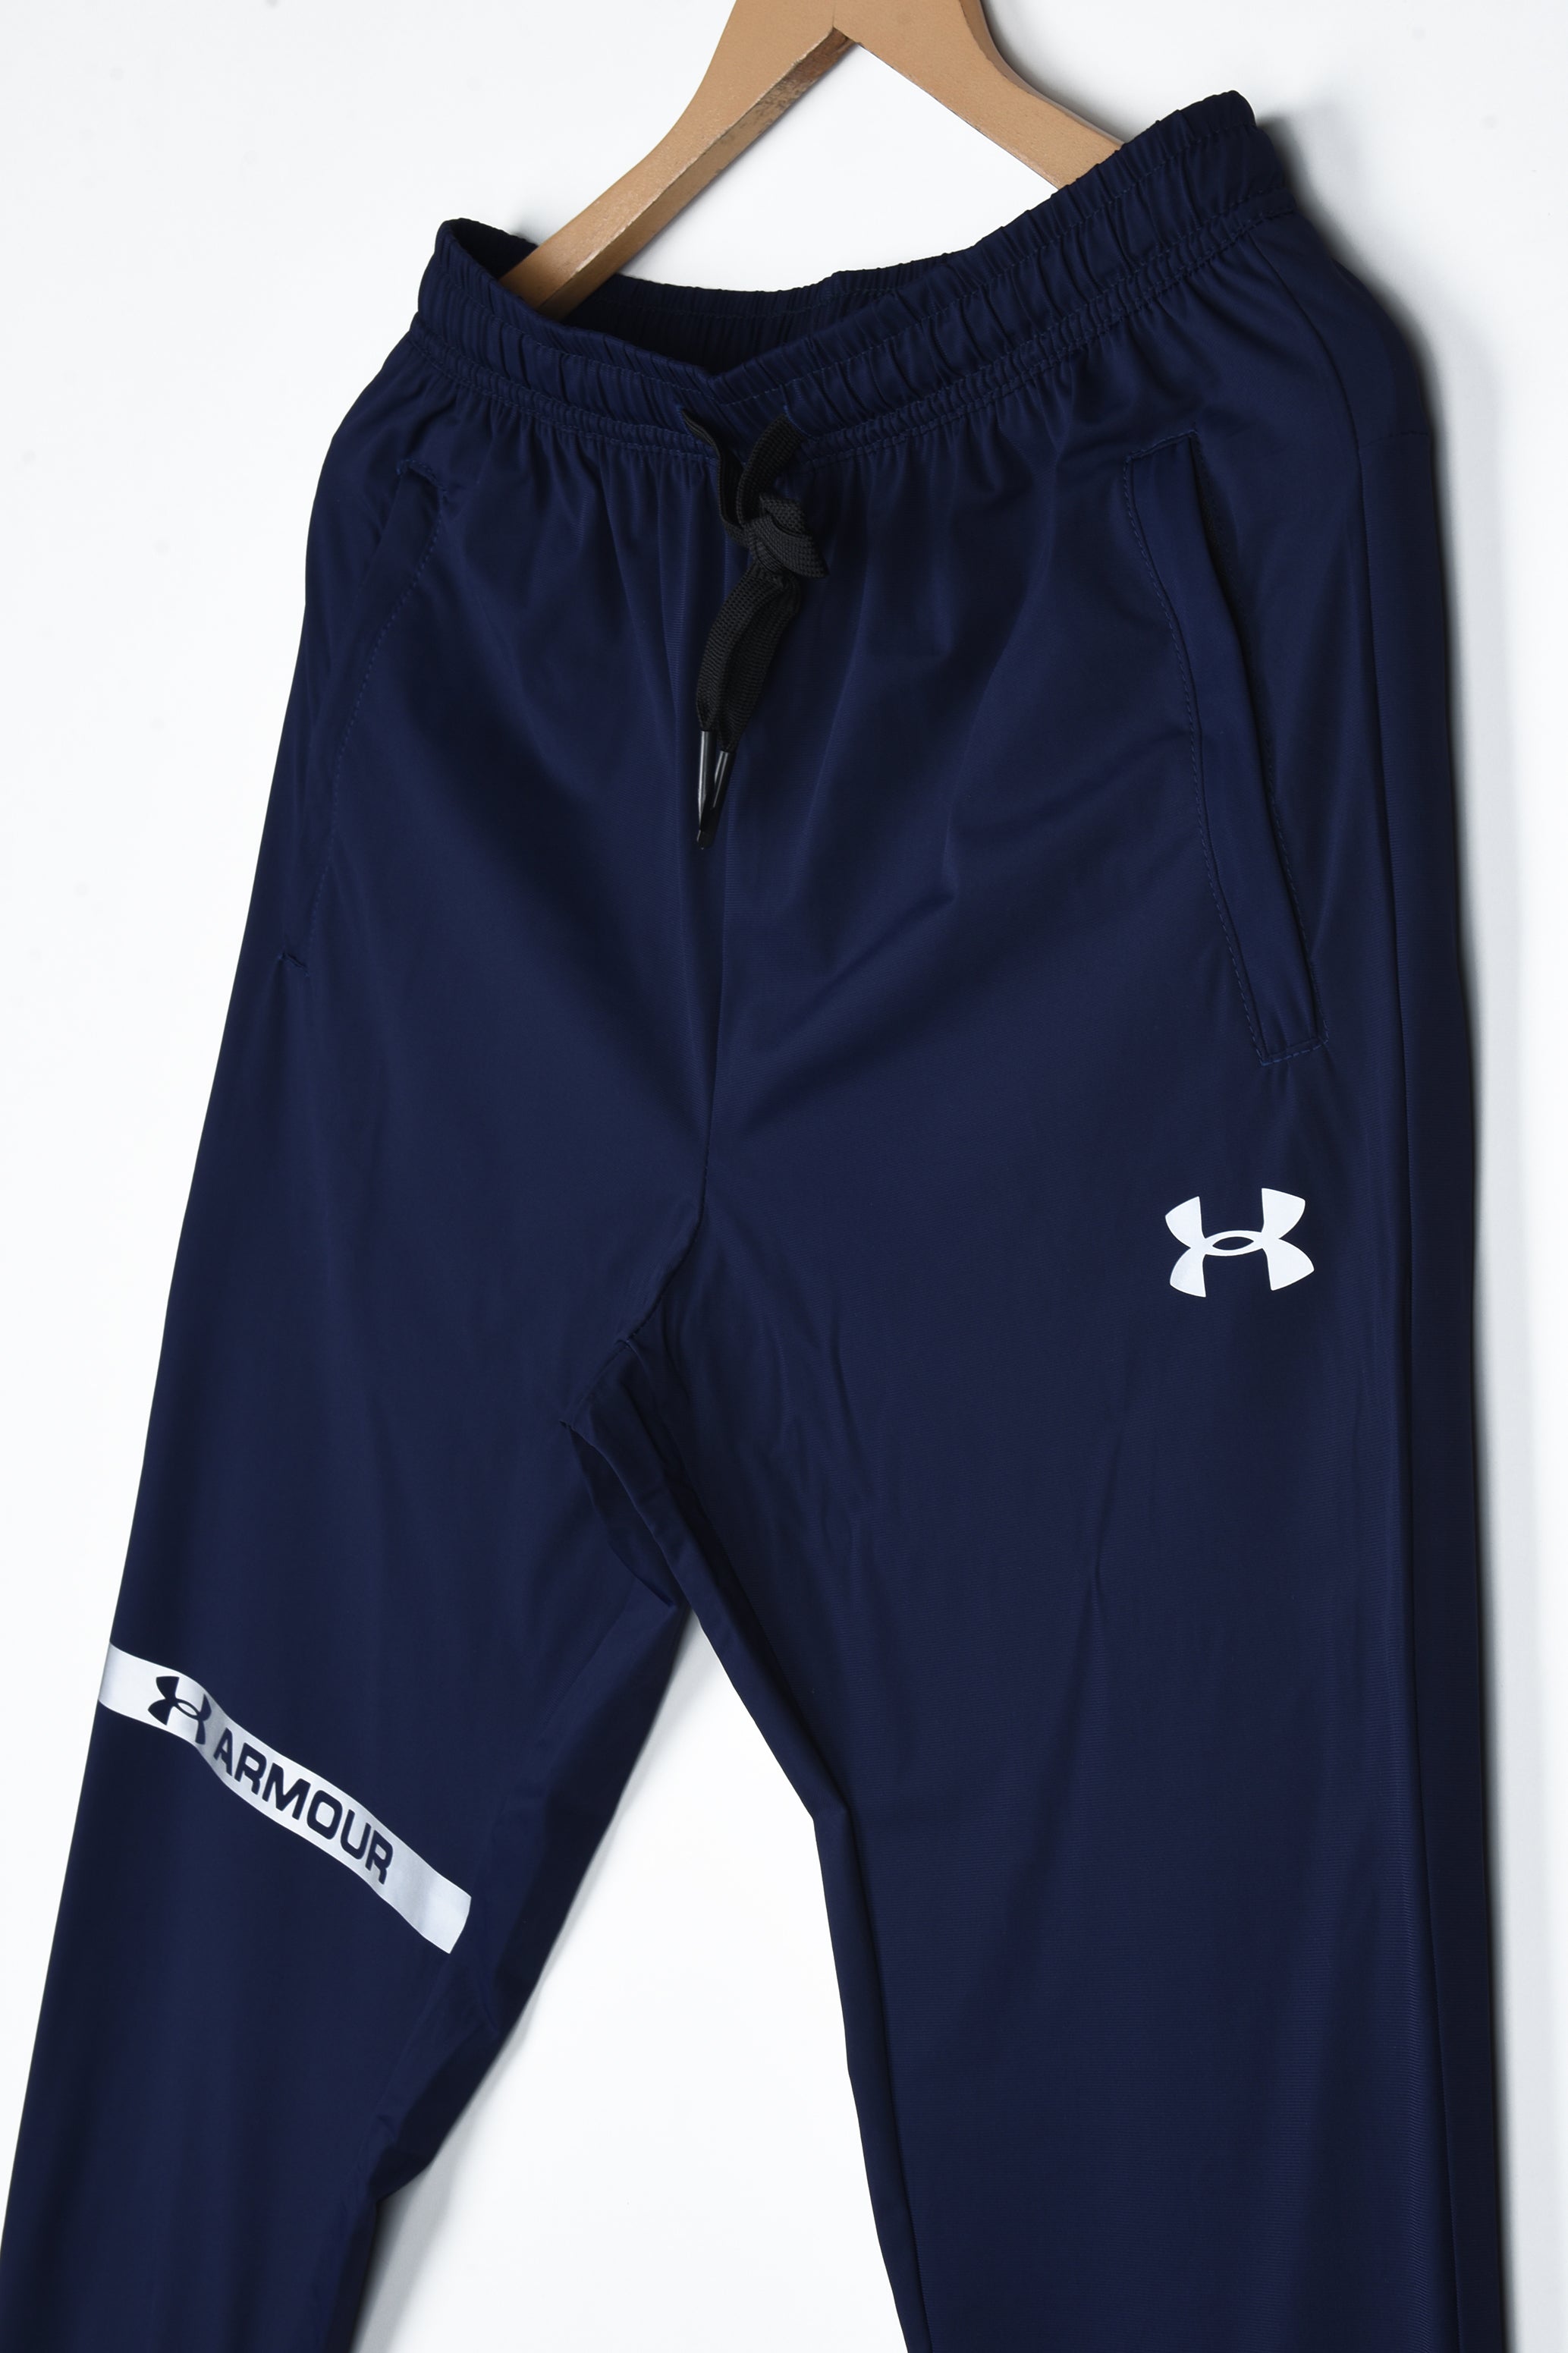 Under Armour Dri Fit Pants Athletic Youth 7 Black  Duck Worth Wearing